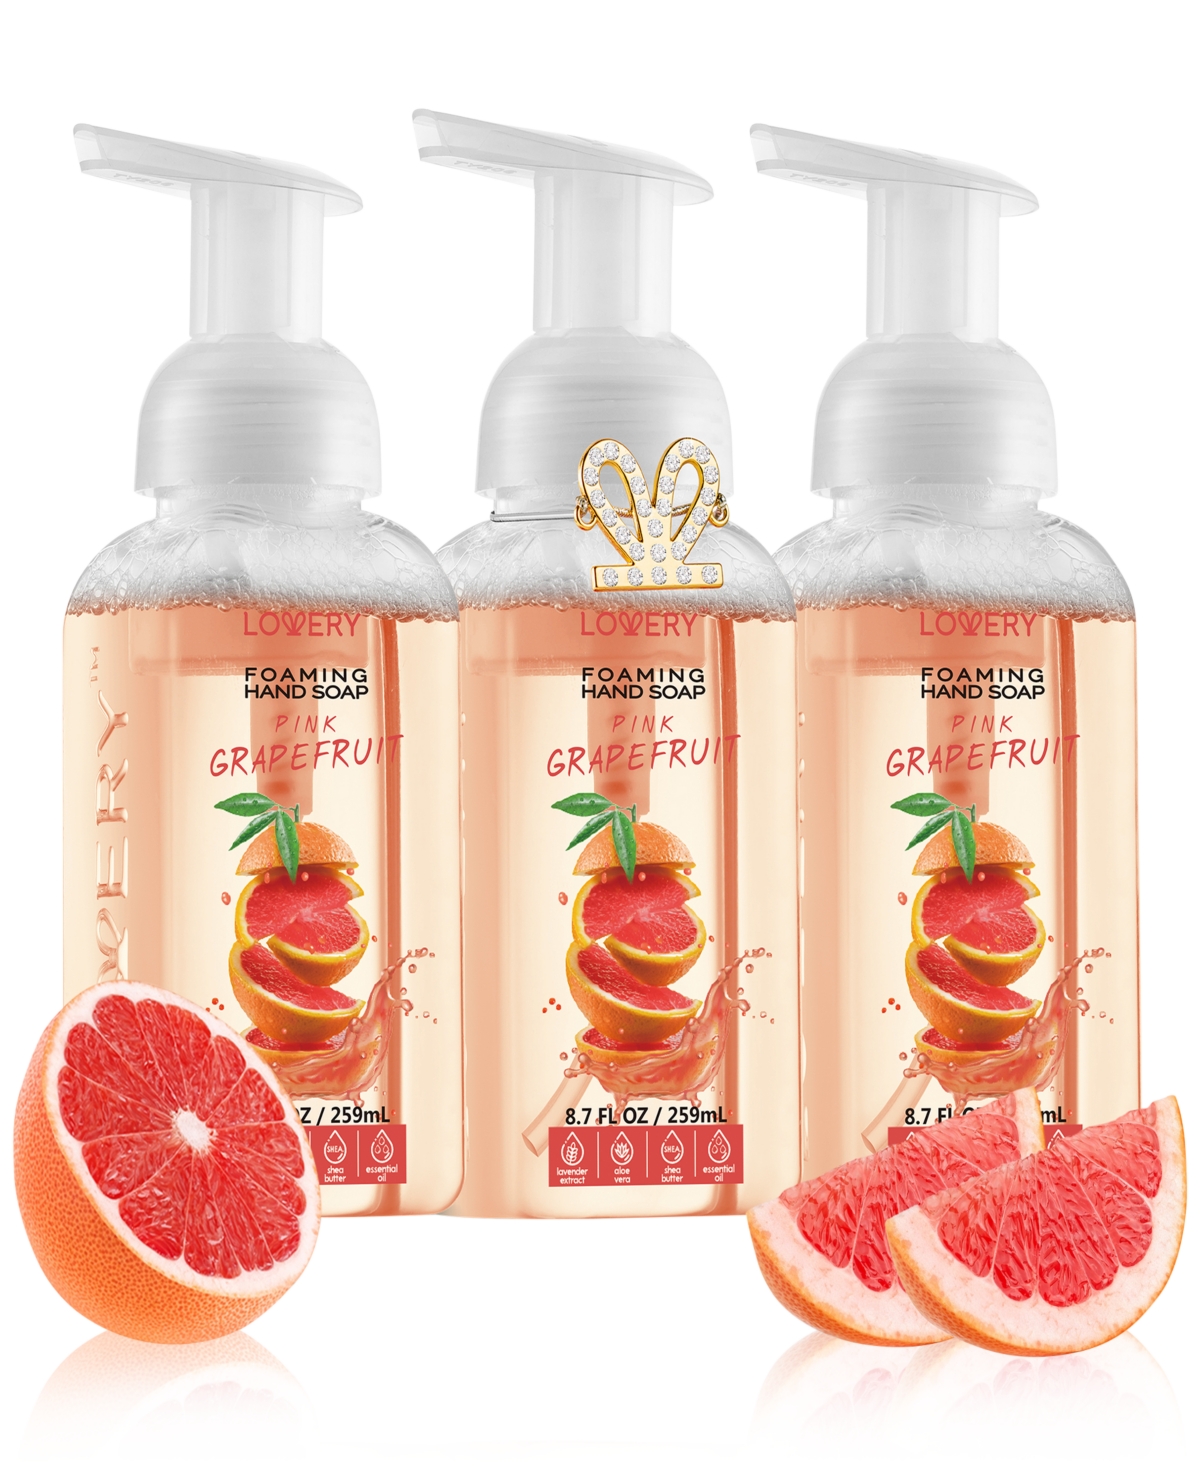 Lovery Hand Foaming Soap in Pink Grapefruit, Moisturizing Hand Soap with Flawless Crystal Heart Bracelet - Hand Wash Set, 4 Piece